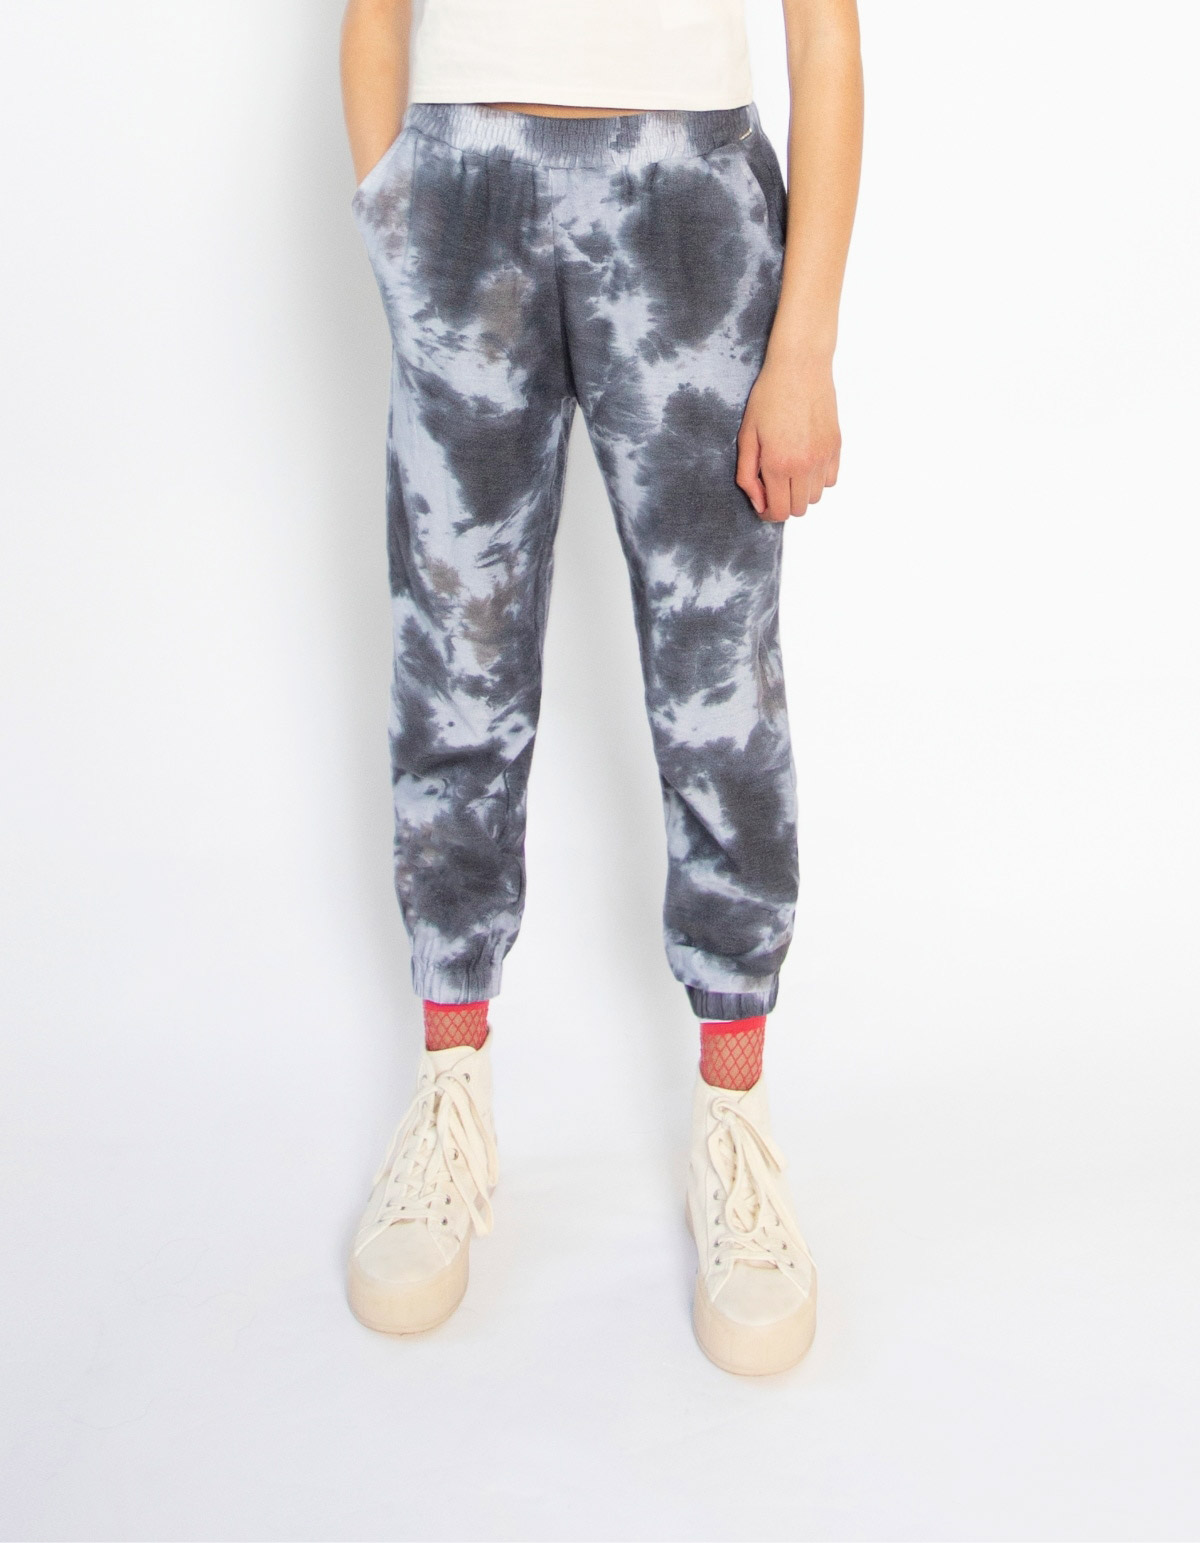 Girls’ black and white tie-dye joggers